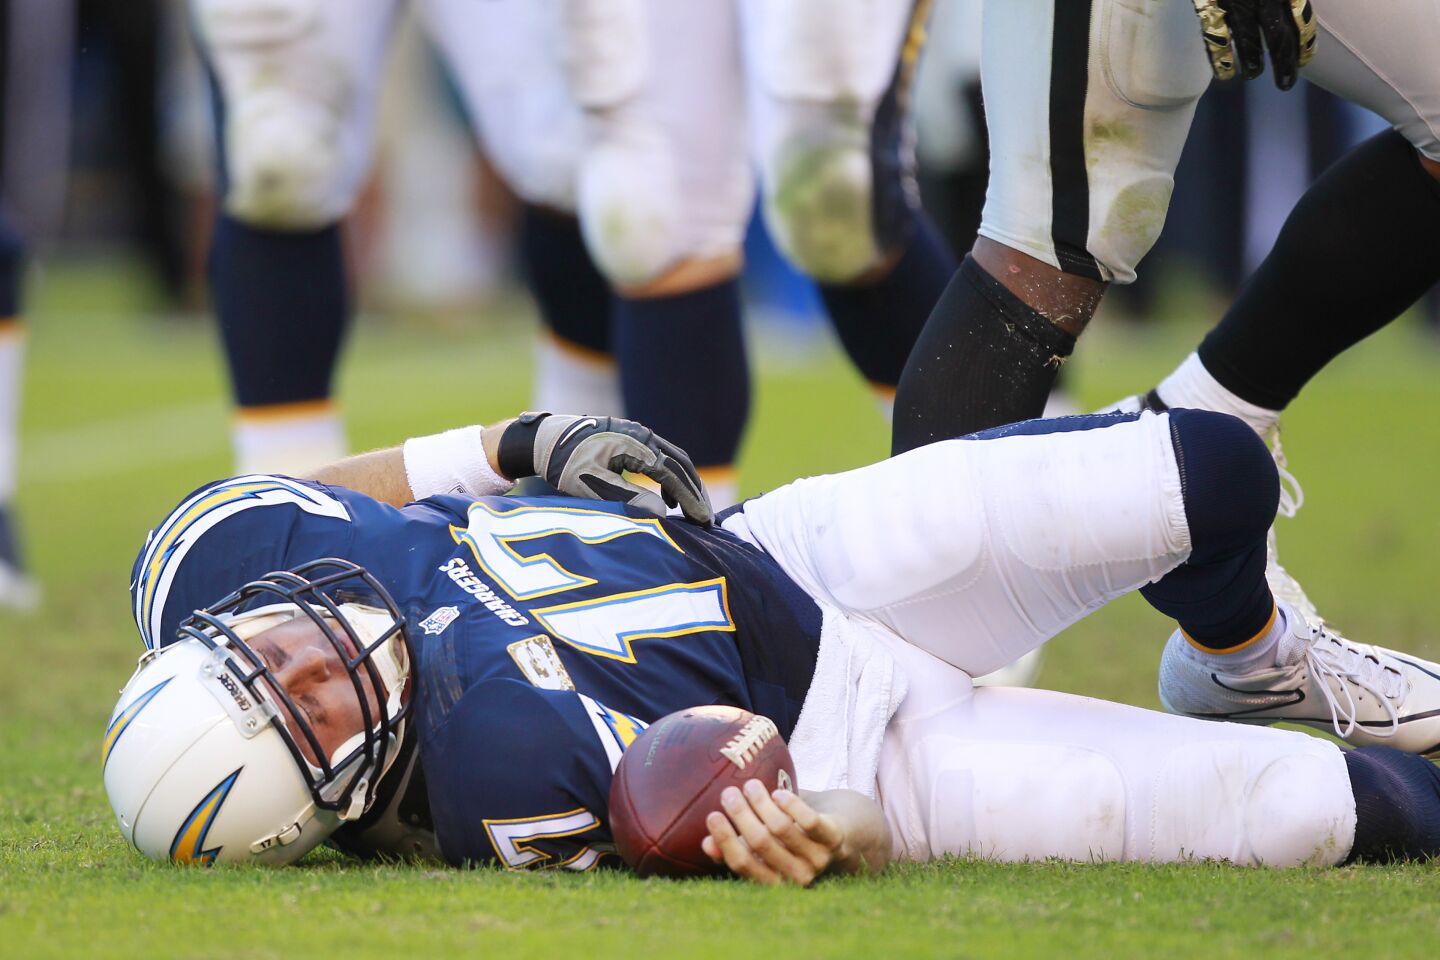 Chargers Philip Rivers grimaces after getting hit by Raiders Khalil Mack in the 4th quarter at Qualcomm Stadium on Nov. 16, 2014.